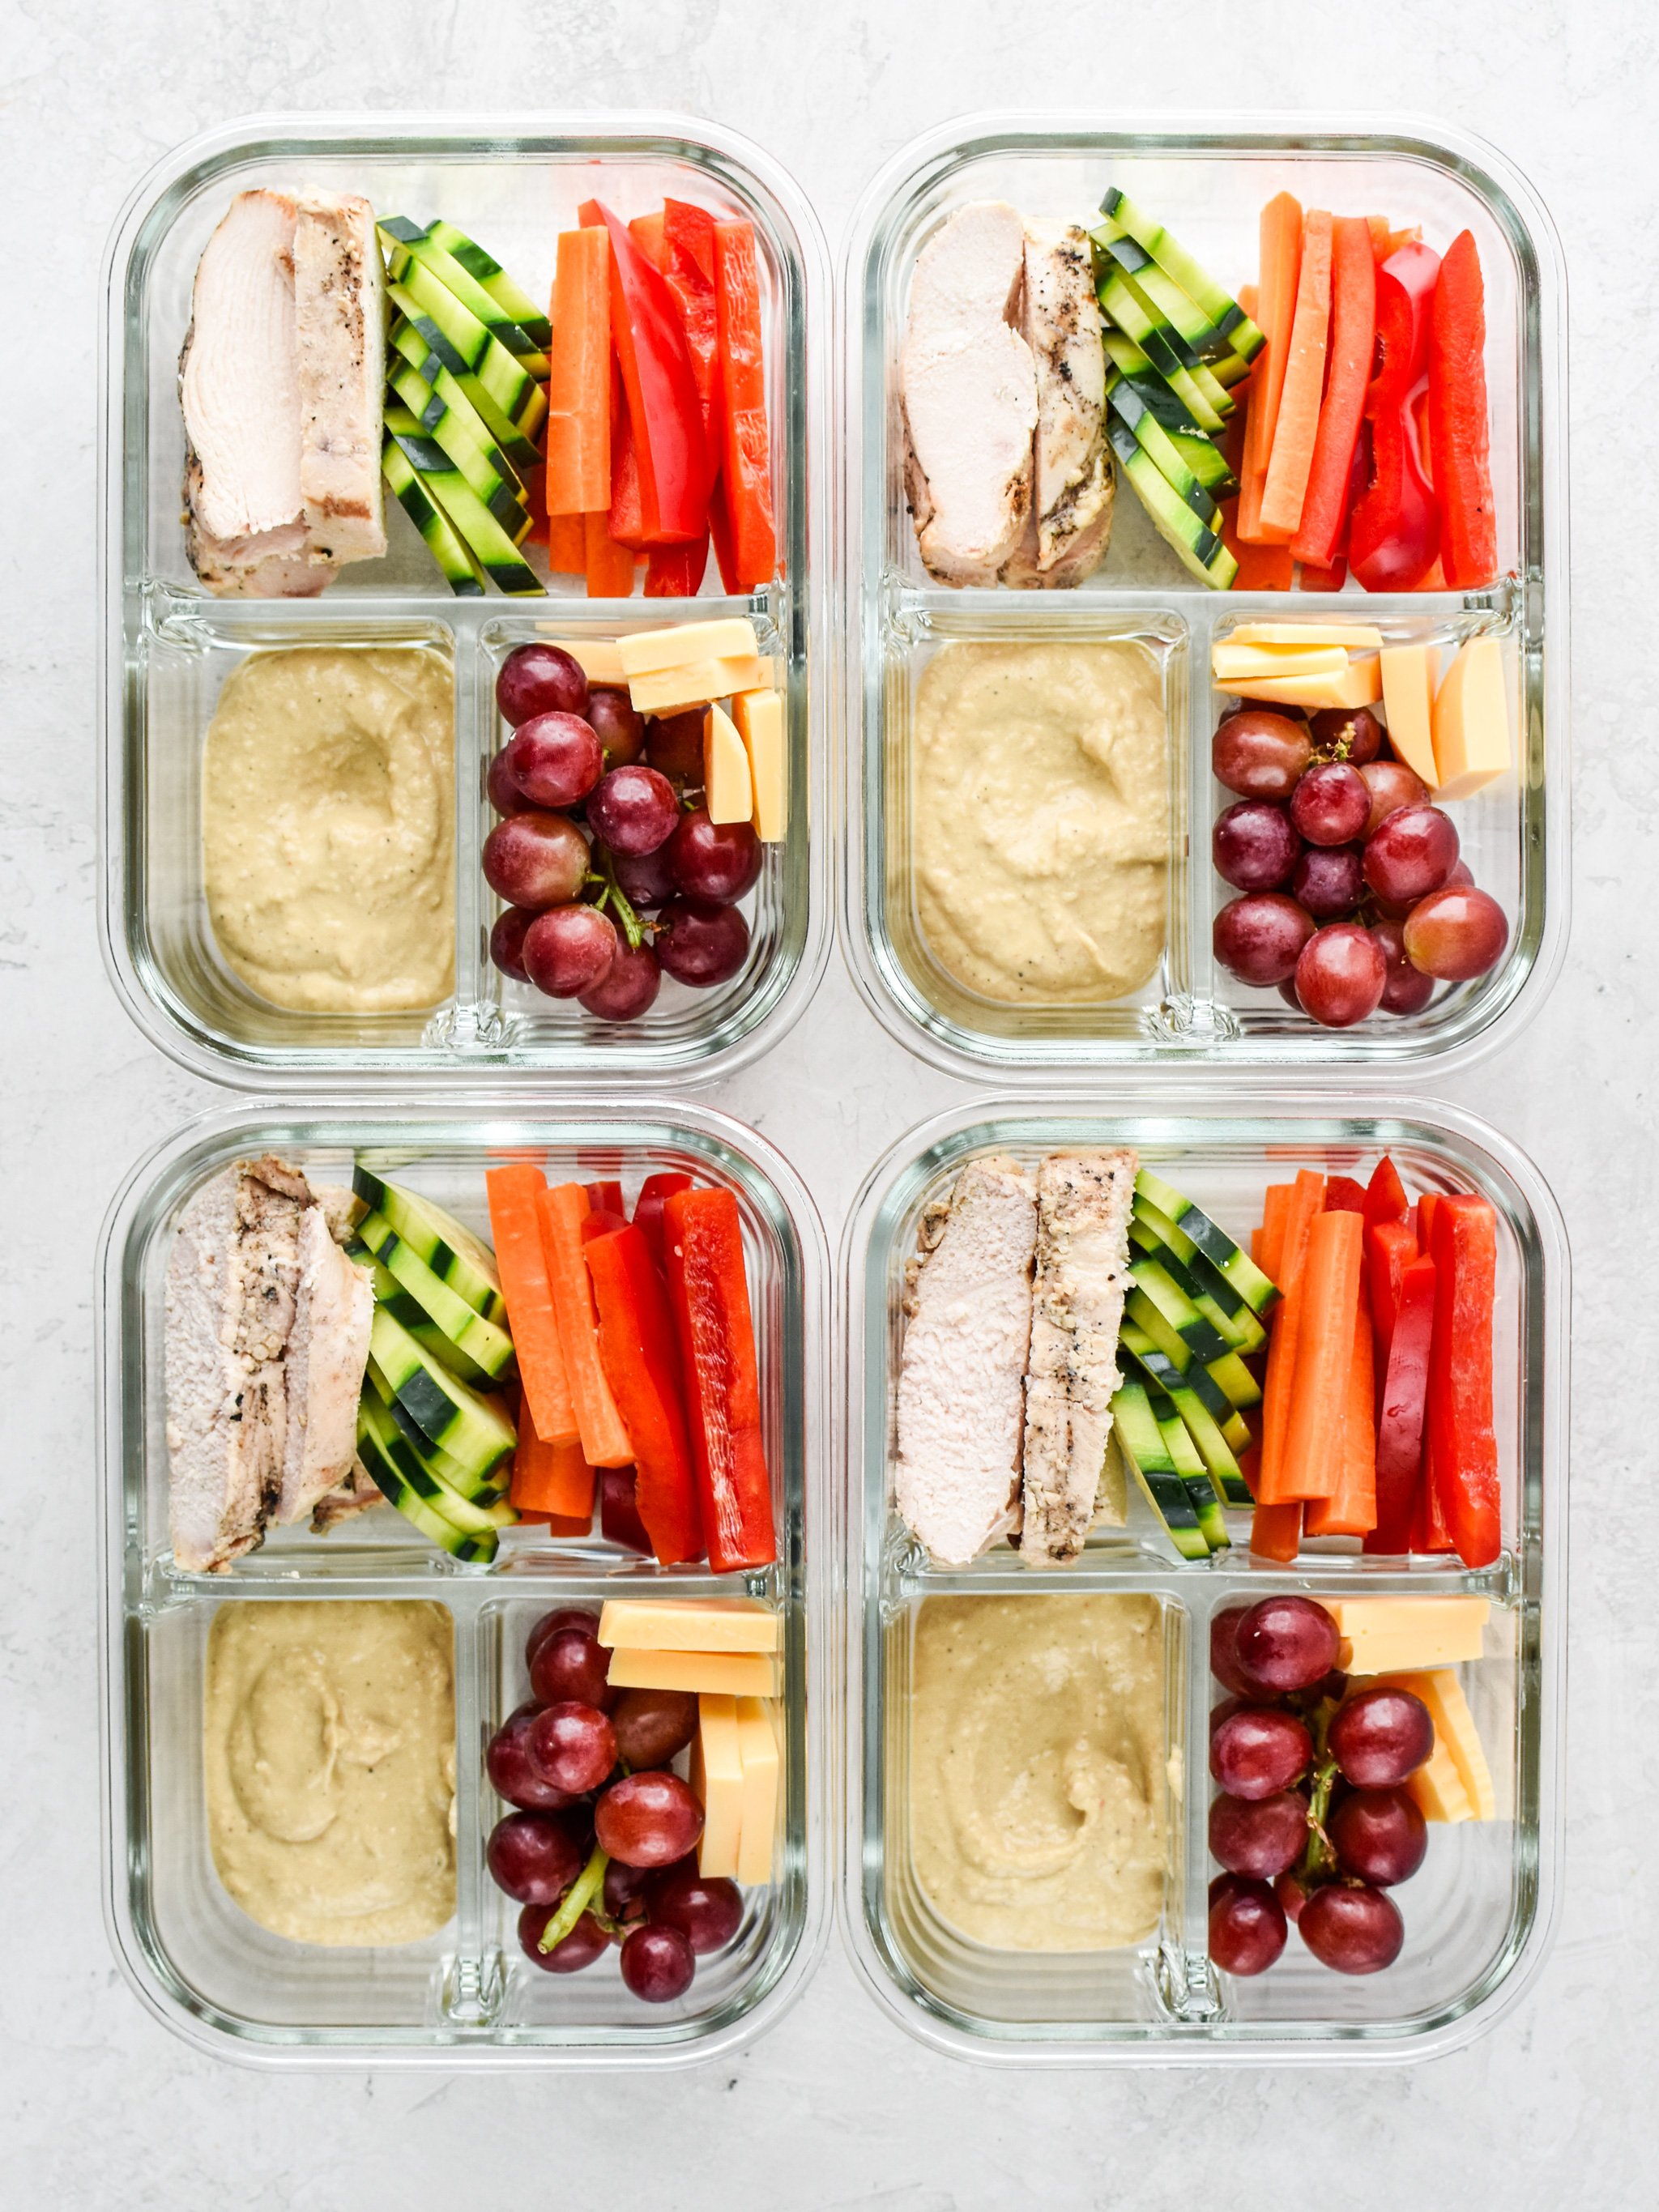 Chicken & Hummus Plate Lunch Meal Prep lunches with chicken, vegetables and hummus.